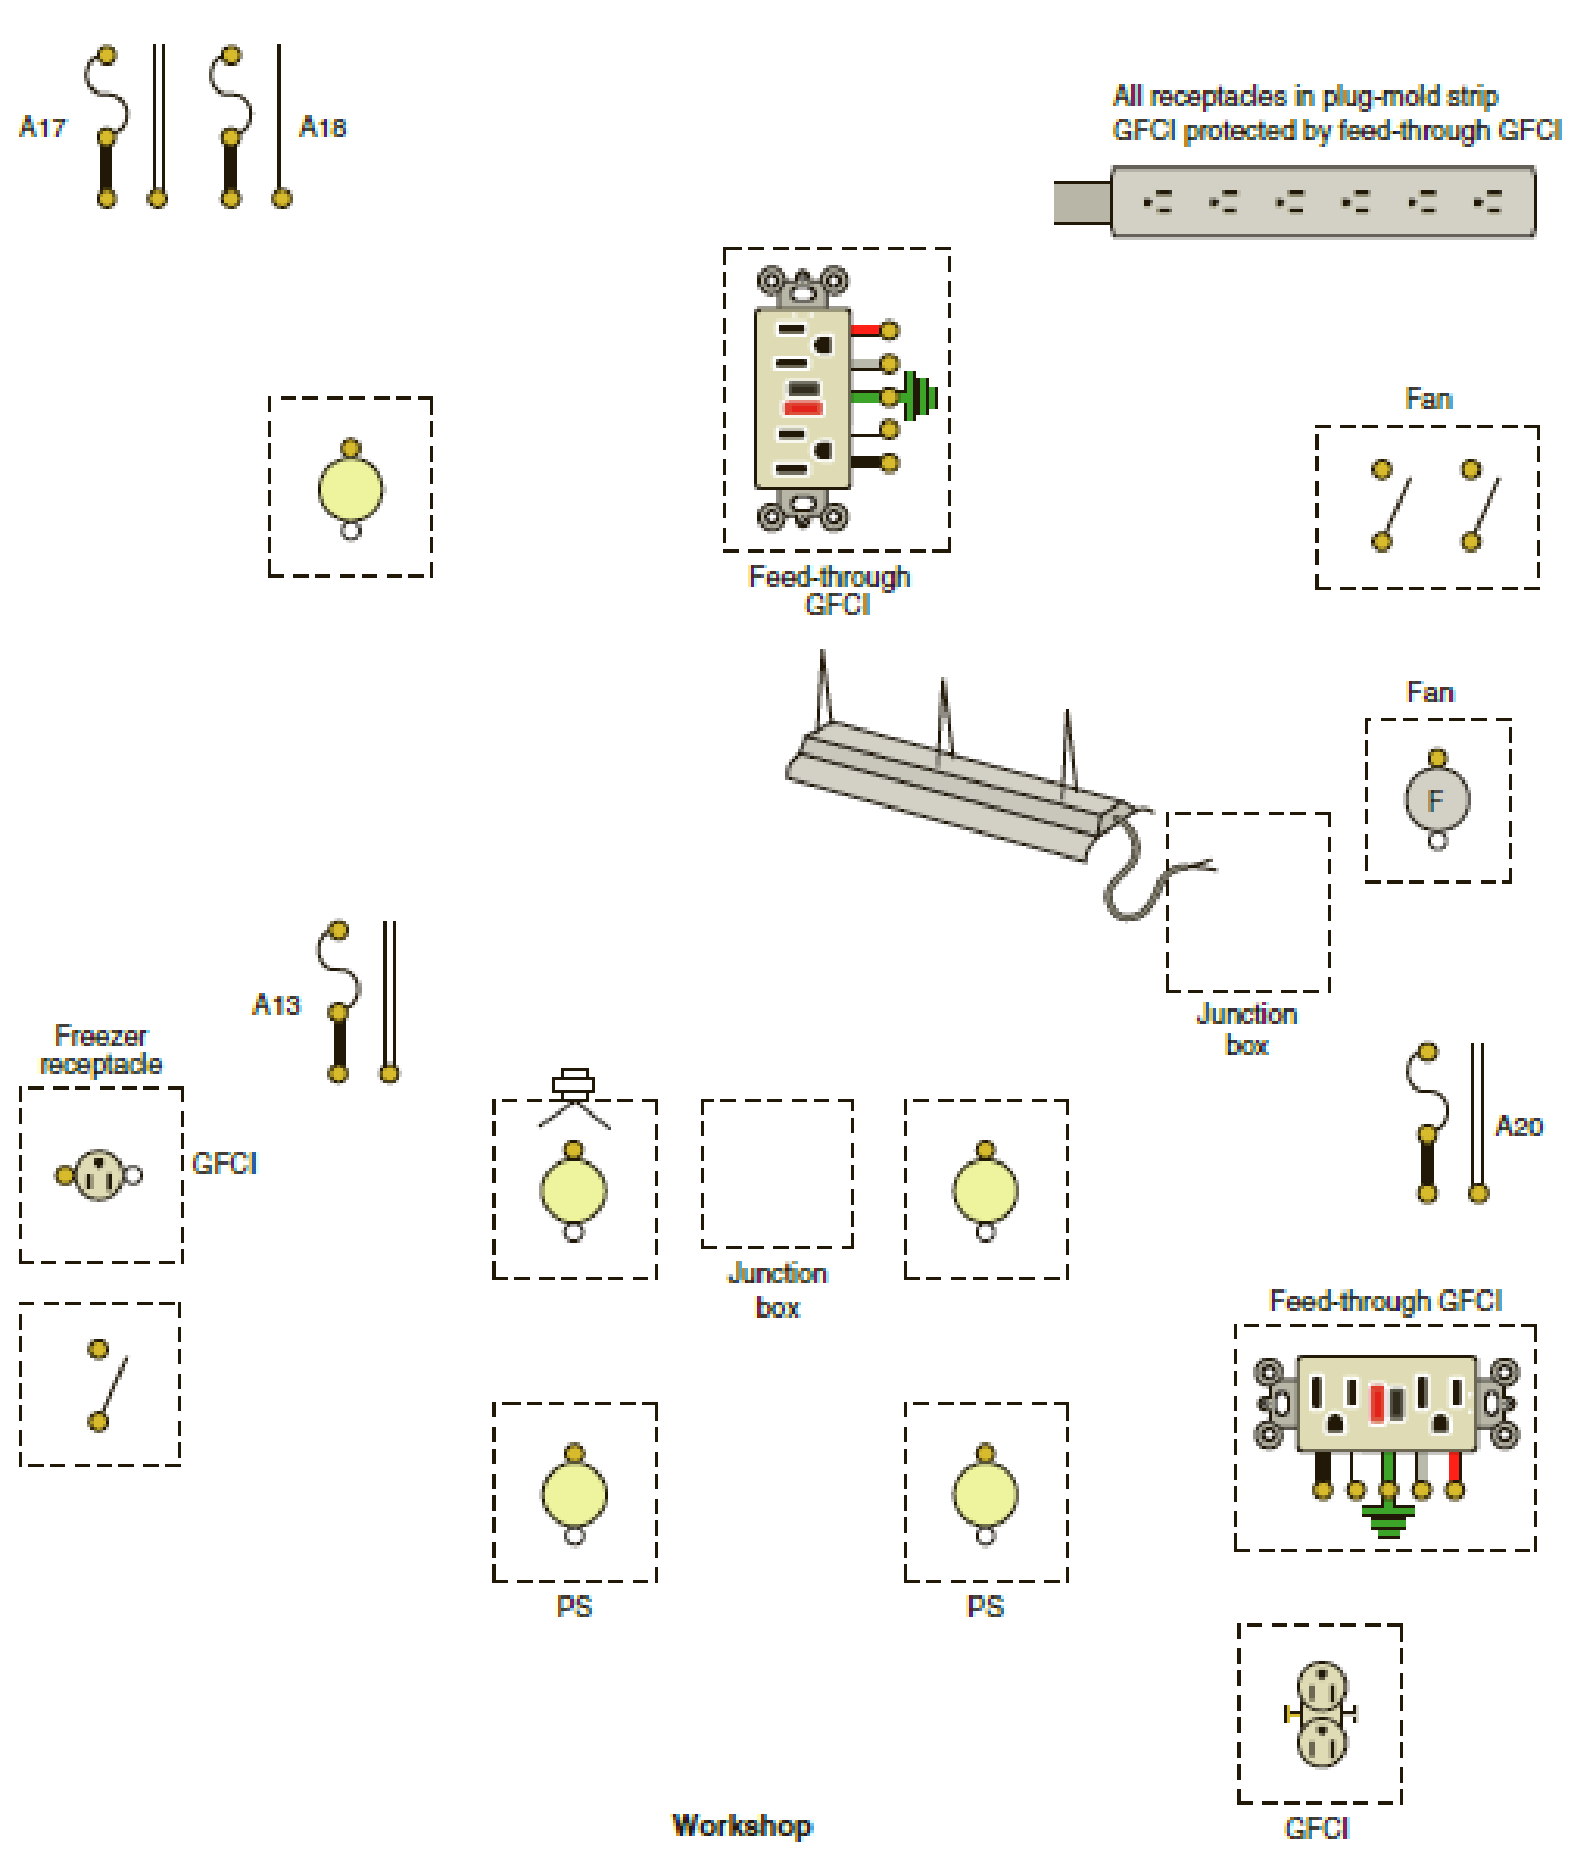 The Following Is A Layout Of The Lighting Circuits For The Workshop Using The Wiring Layout In Figure 18 1 Make A Complete Wiring Diagram Use Colored Pencils Or Pens To Indicate Conductors